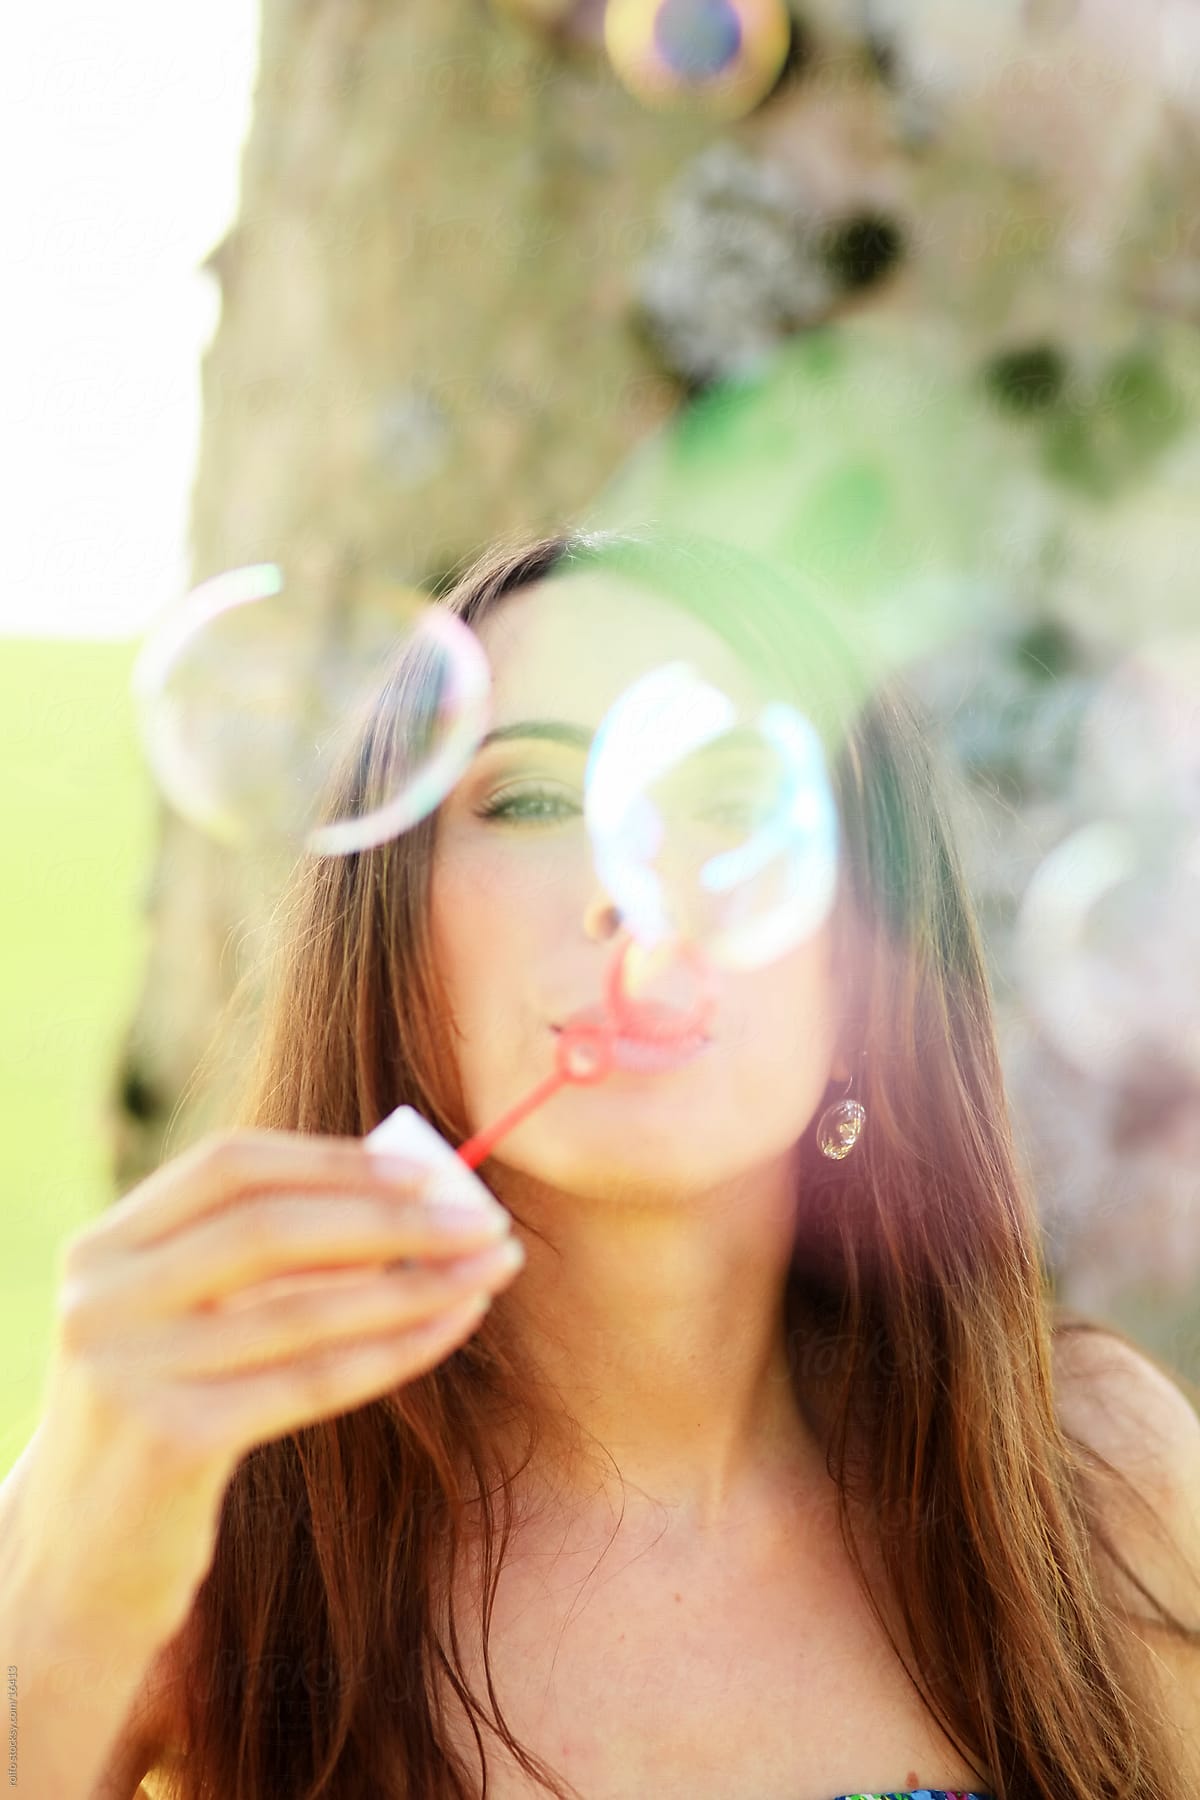 Girl Blowing Bubbles Outdoors By Stocksy Contributor Rolfo Stocksy